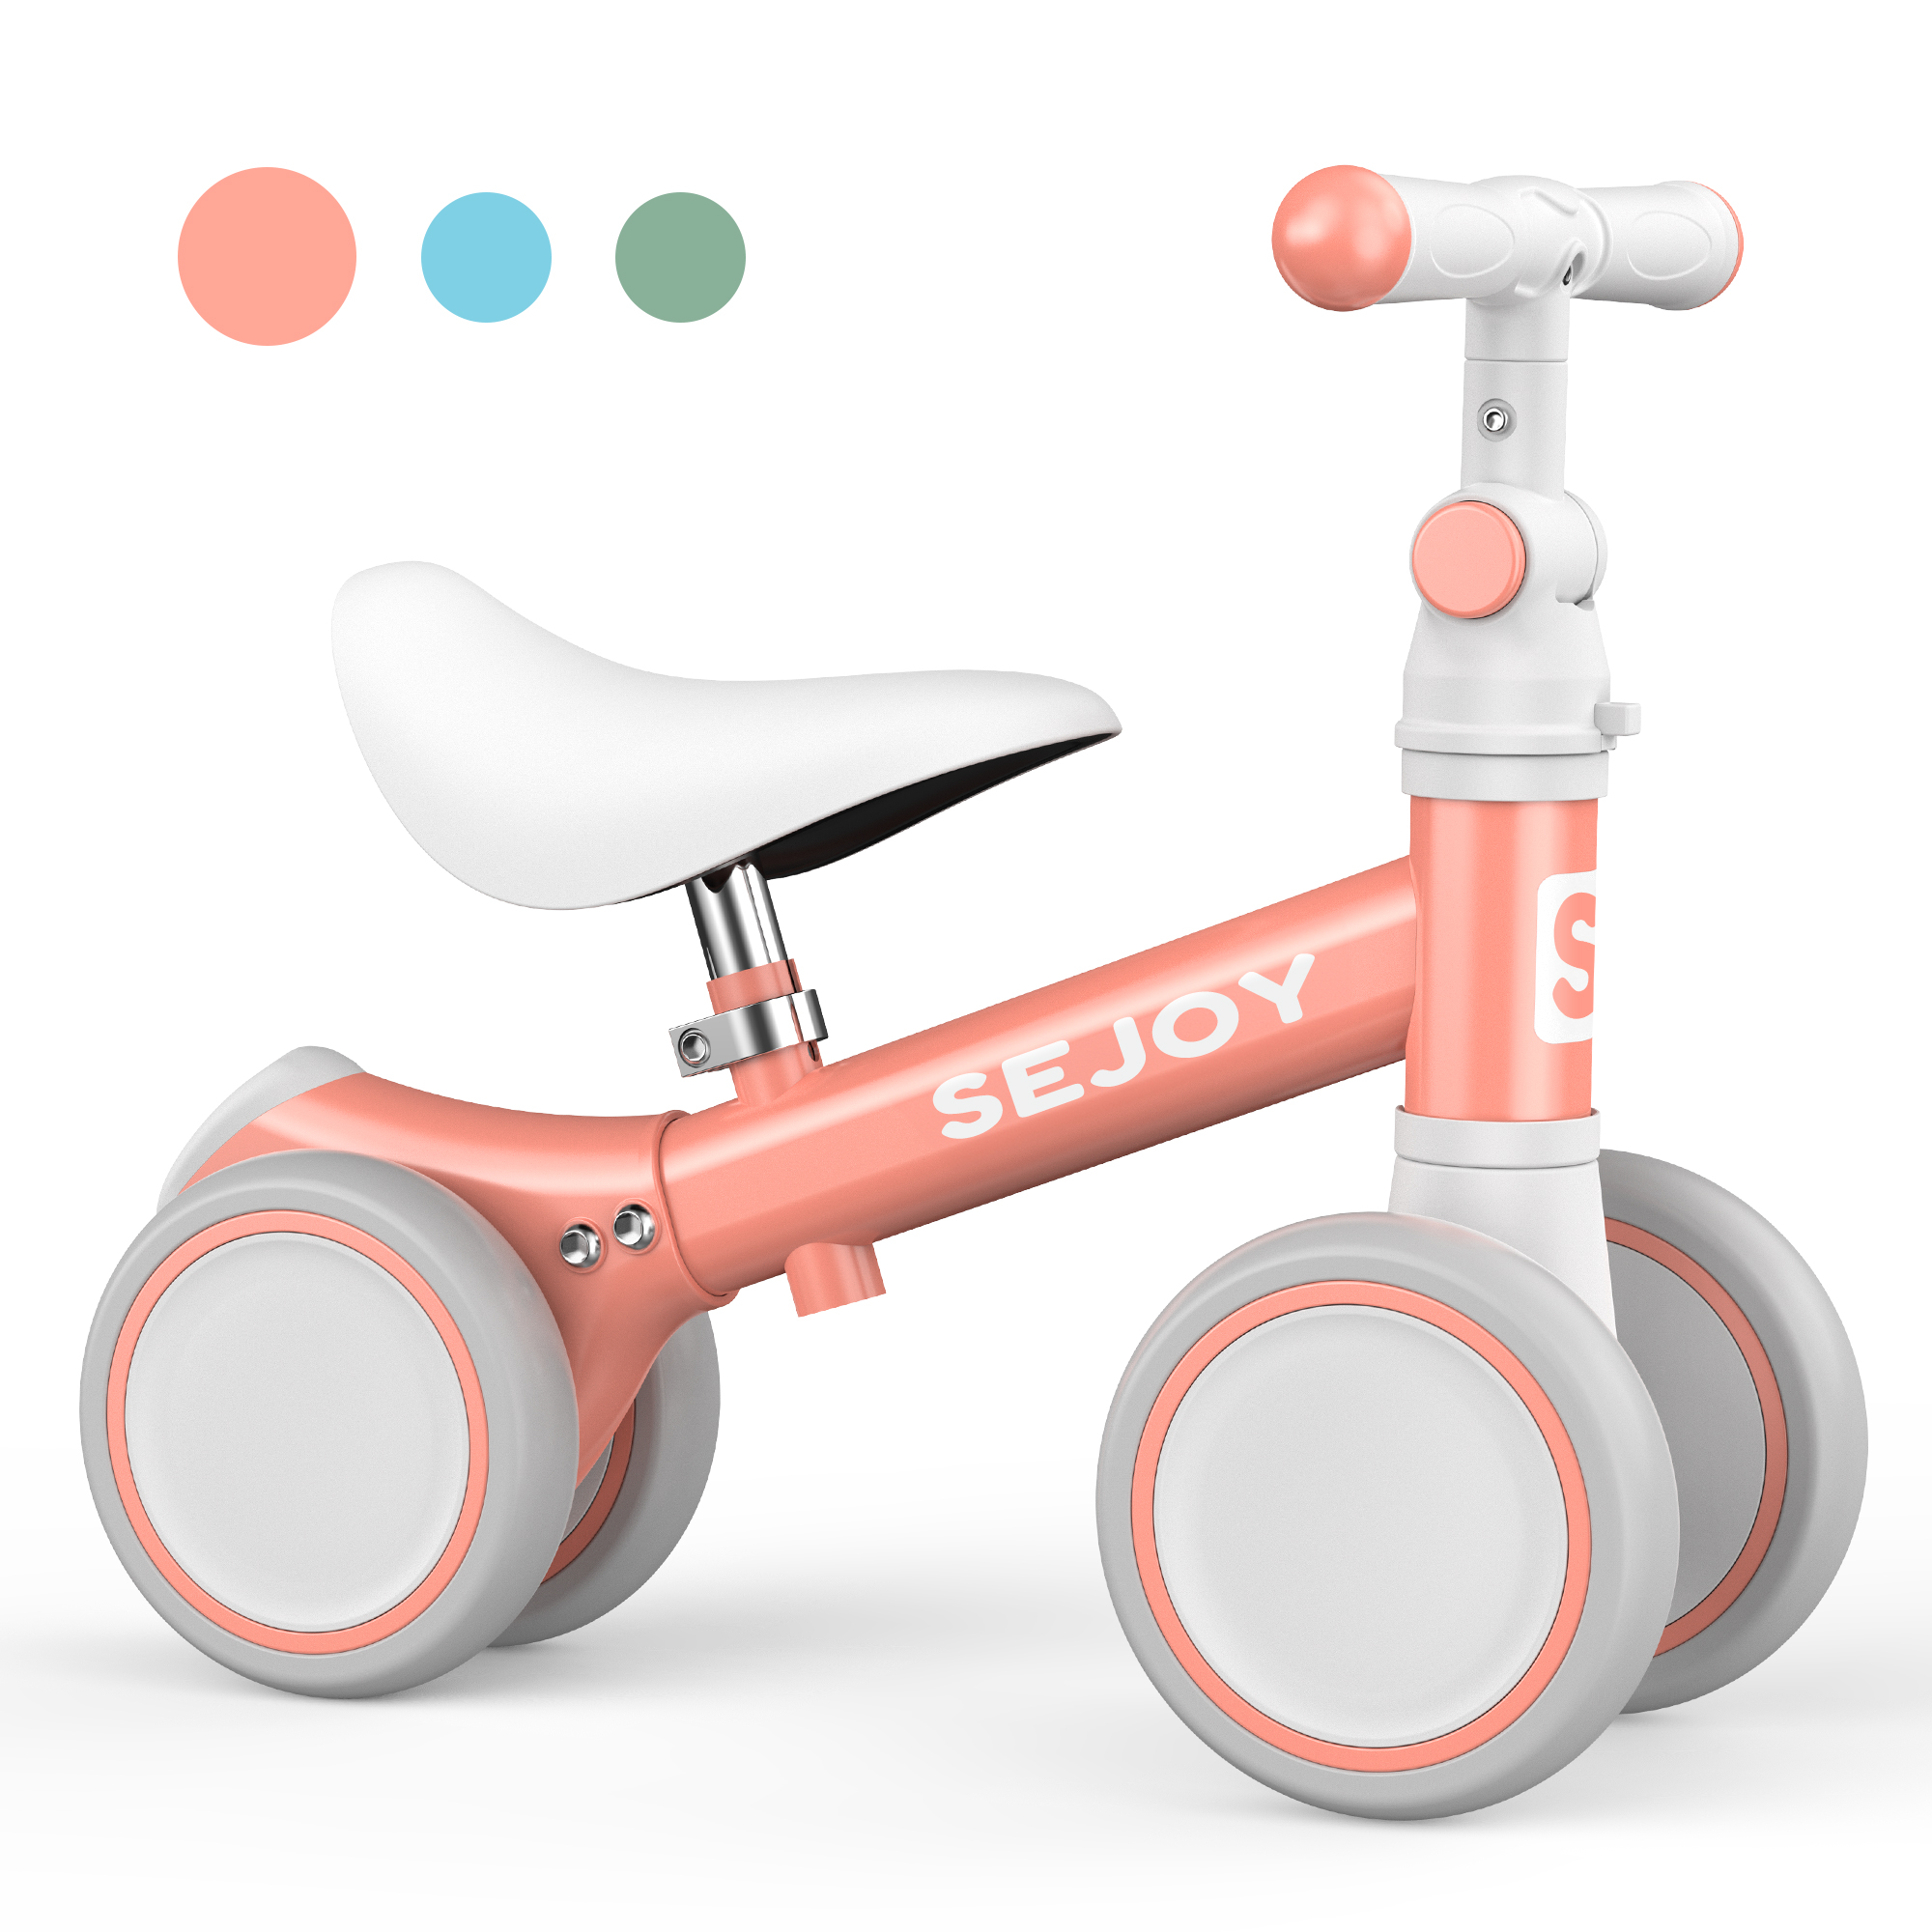 Sejoy Baby Balance Bike, Toddler Baby Bicycle with 4 Wheels for 10-36 Months, Adjustable Handlebar Baby Outdoor Bike Riding Toy, First B-day Gift - image 1 of 9